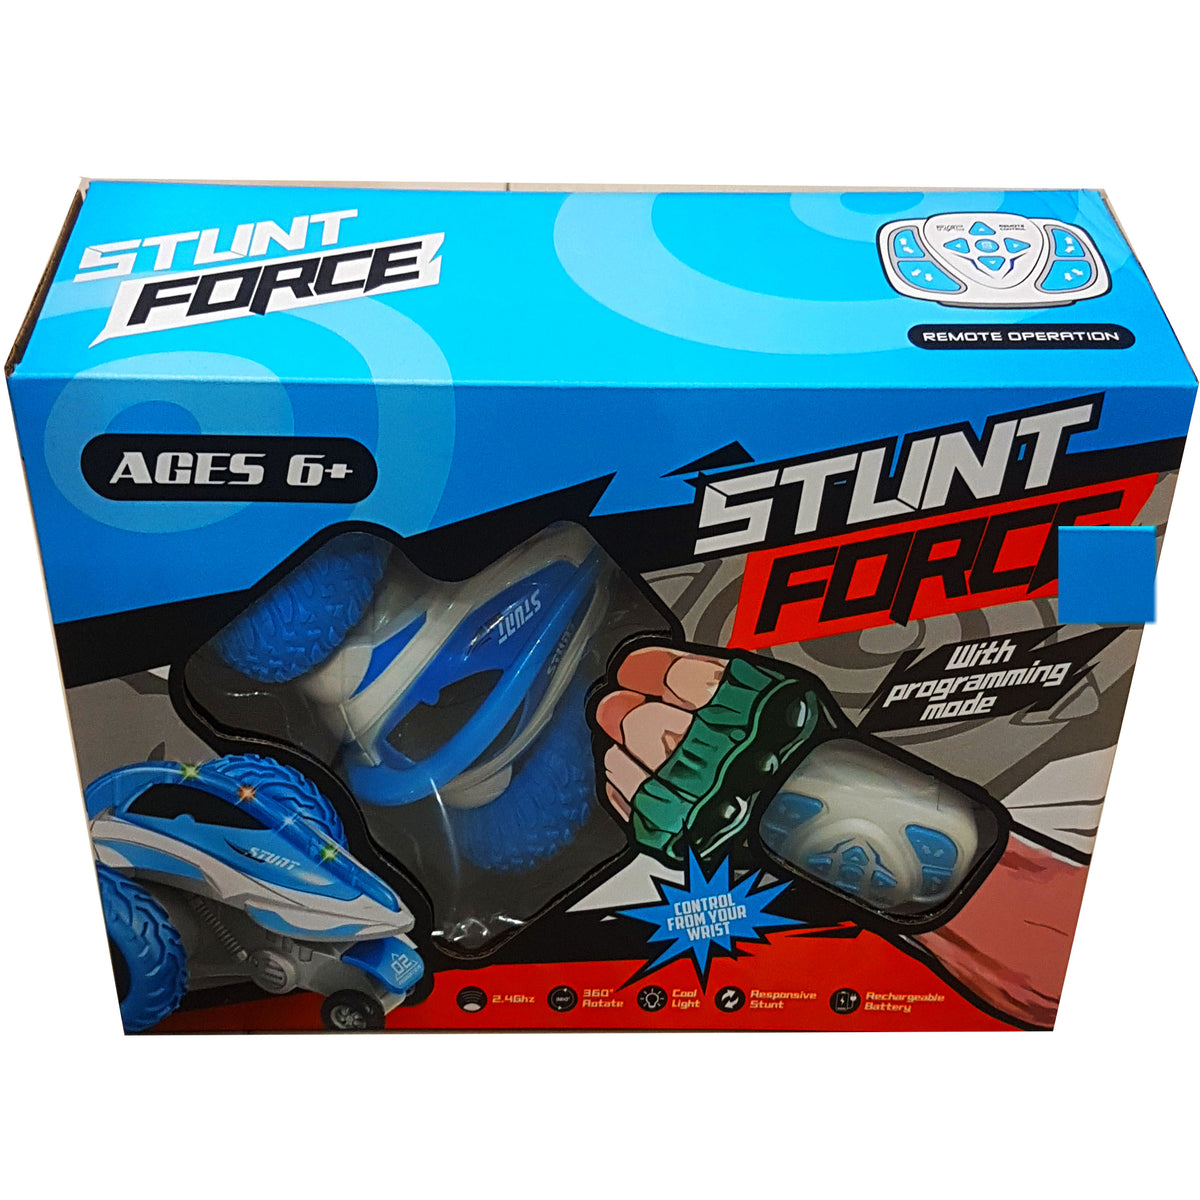 Ultra-Dynamic 360° Stunt Car - Cool LED Lights - Perfect Boys' Gift (Ages 3-10) - Remote Controlled, Rechargeable